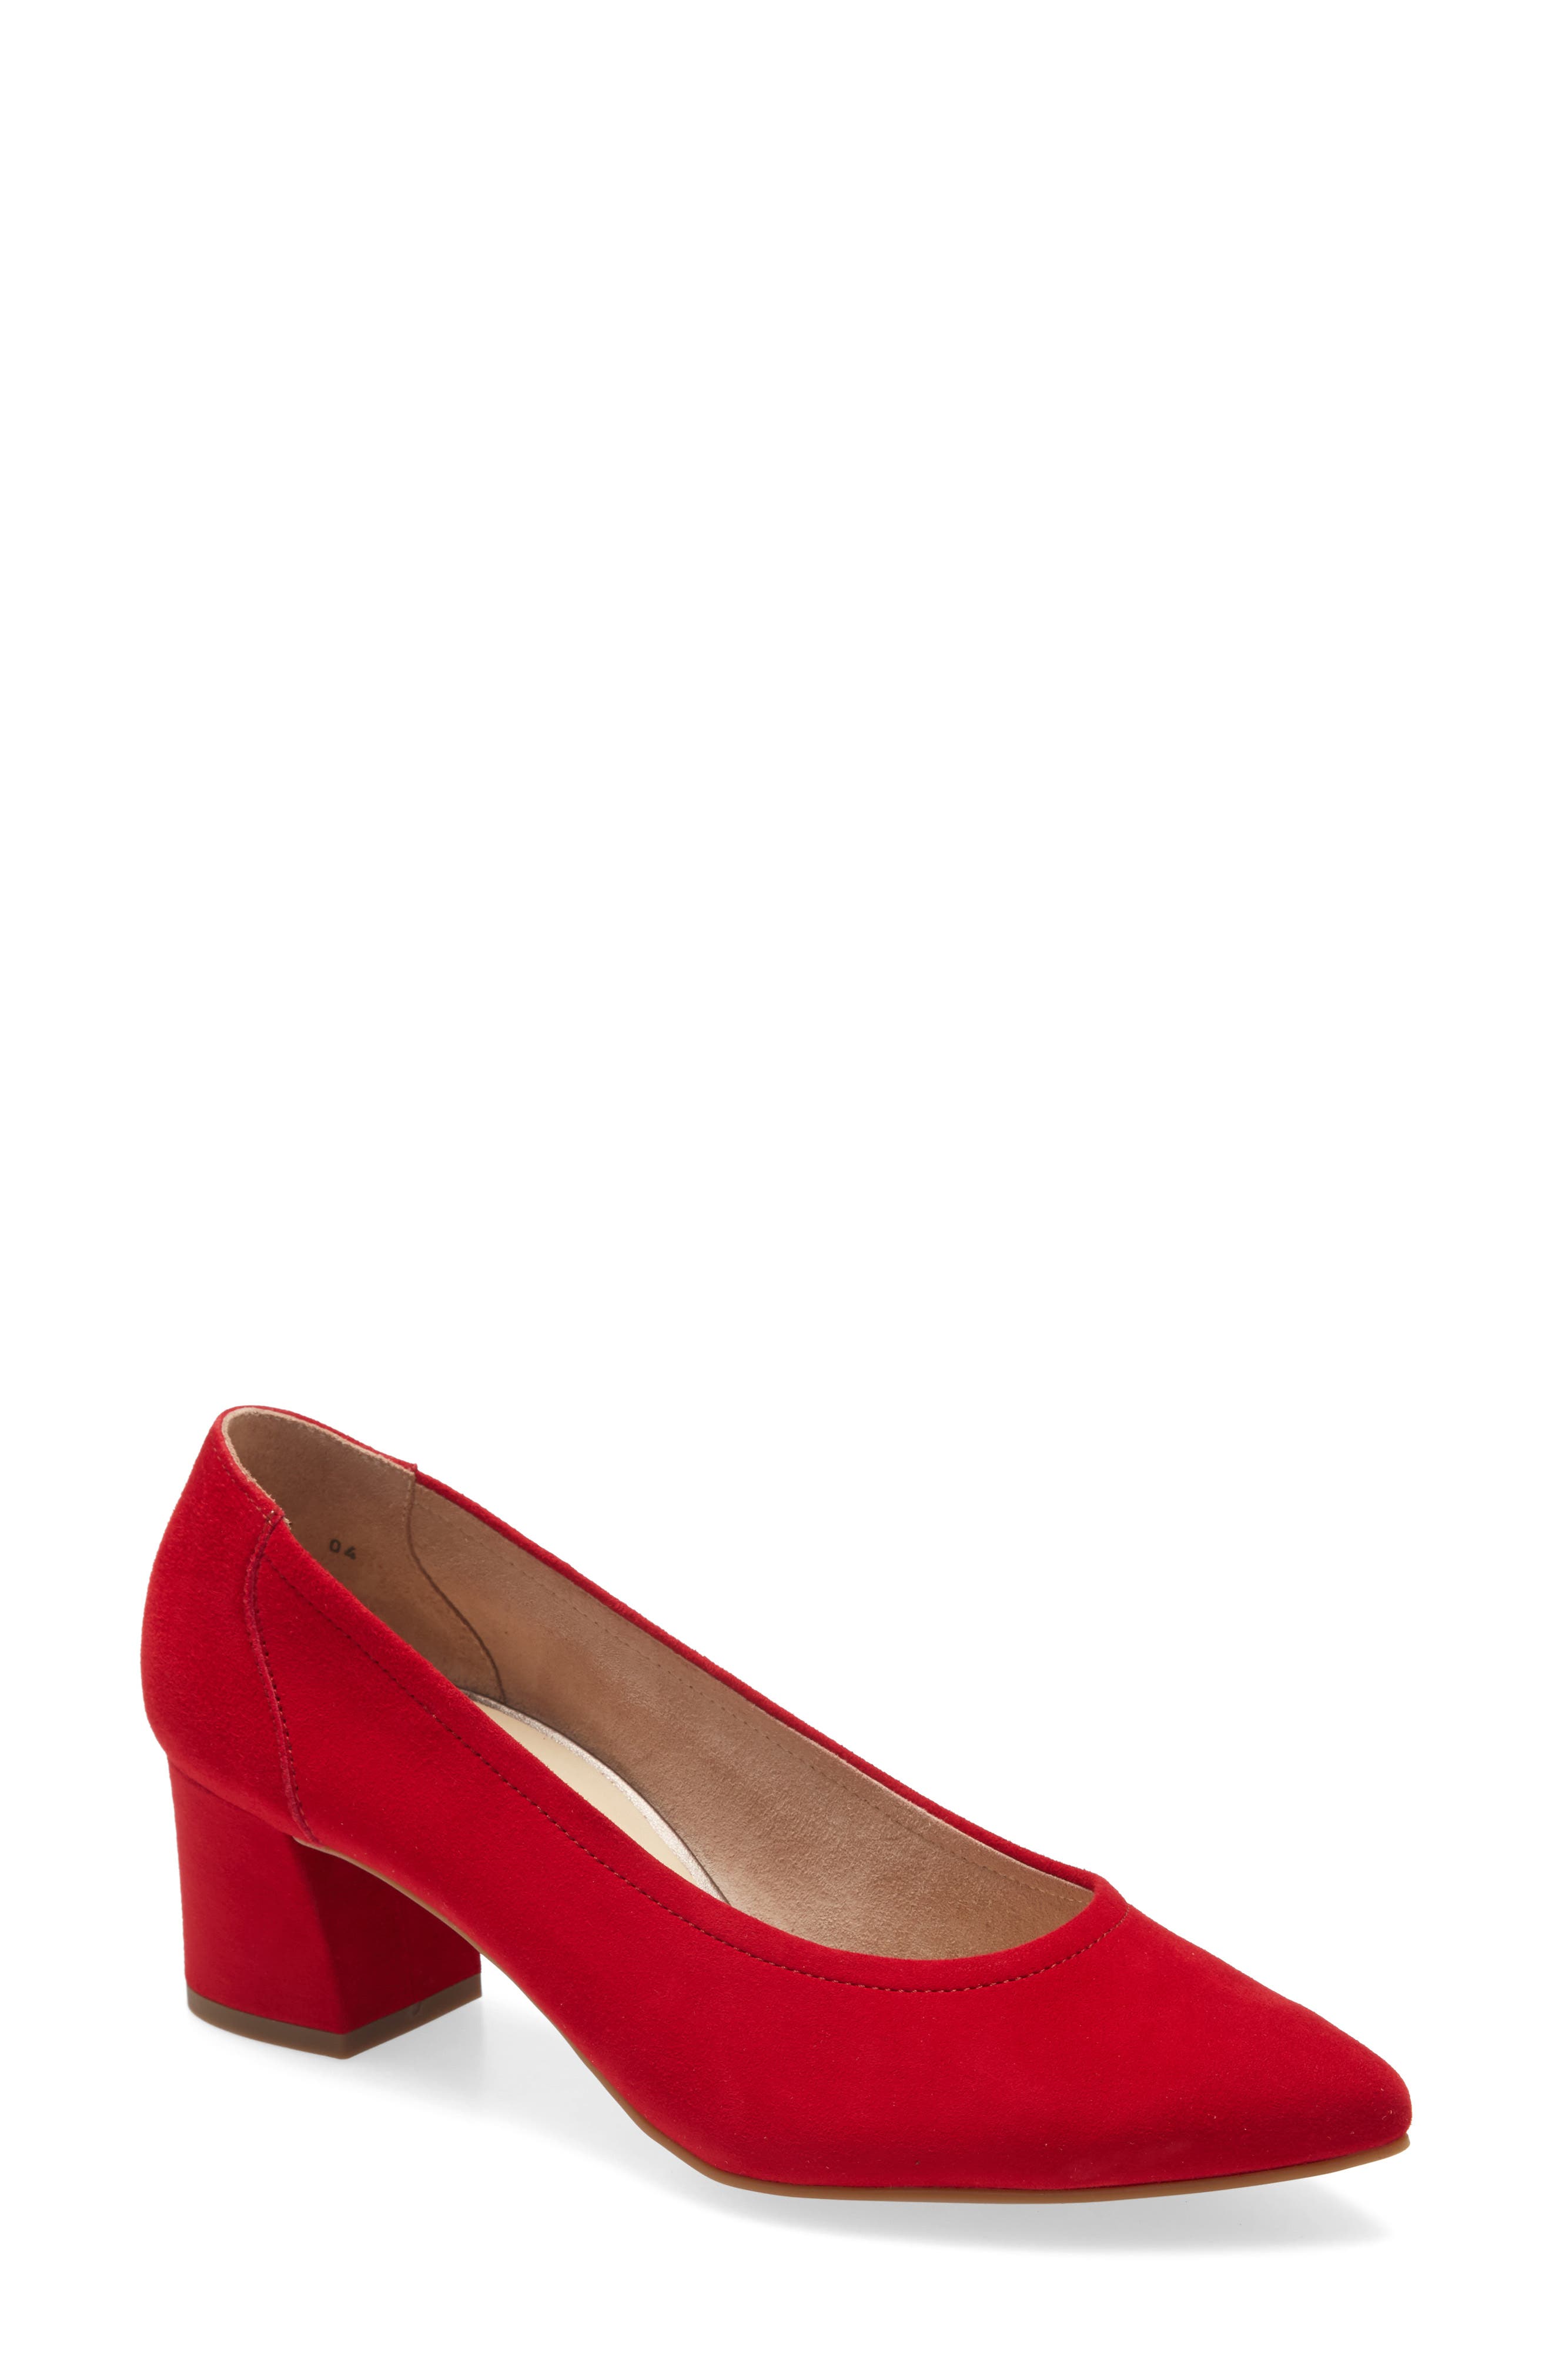 Women's Red Shoes Sale \u0026 Clearance 